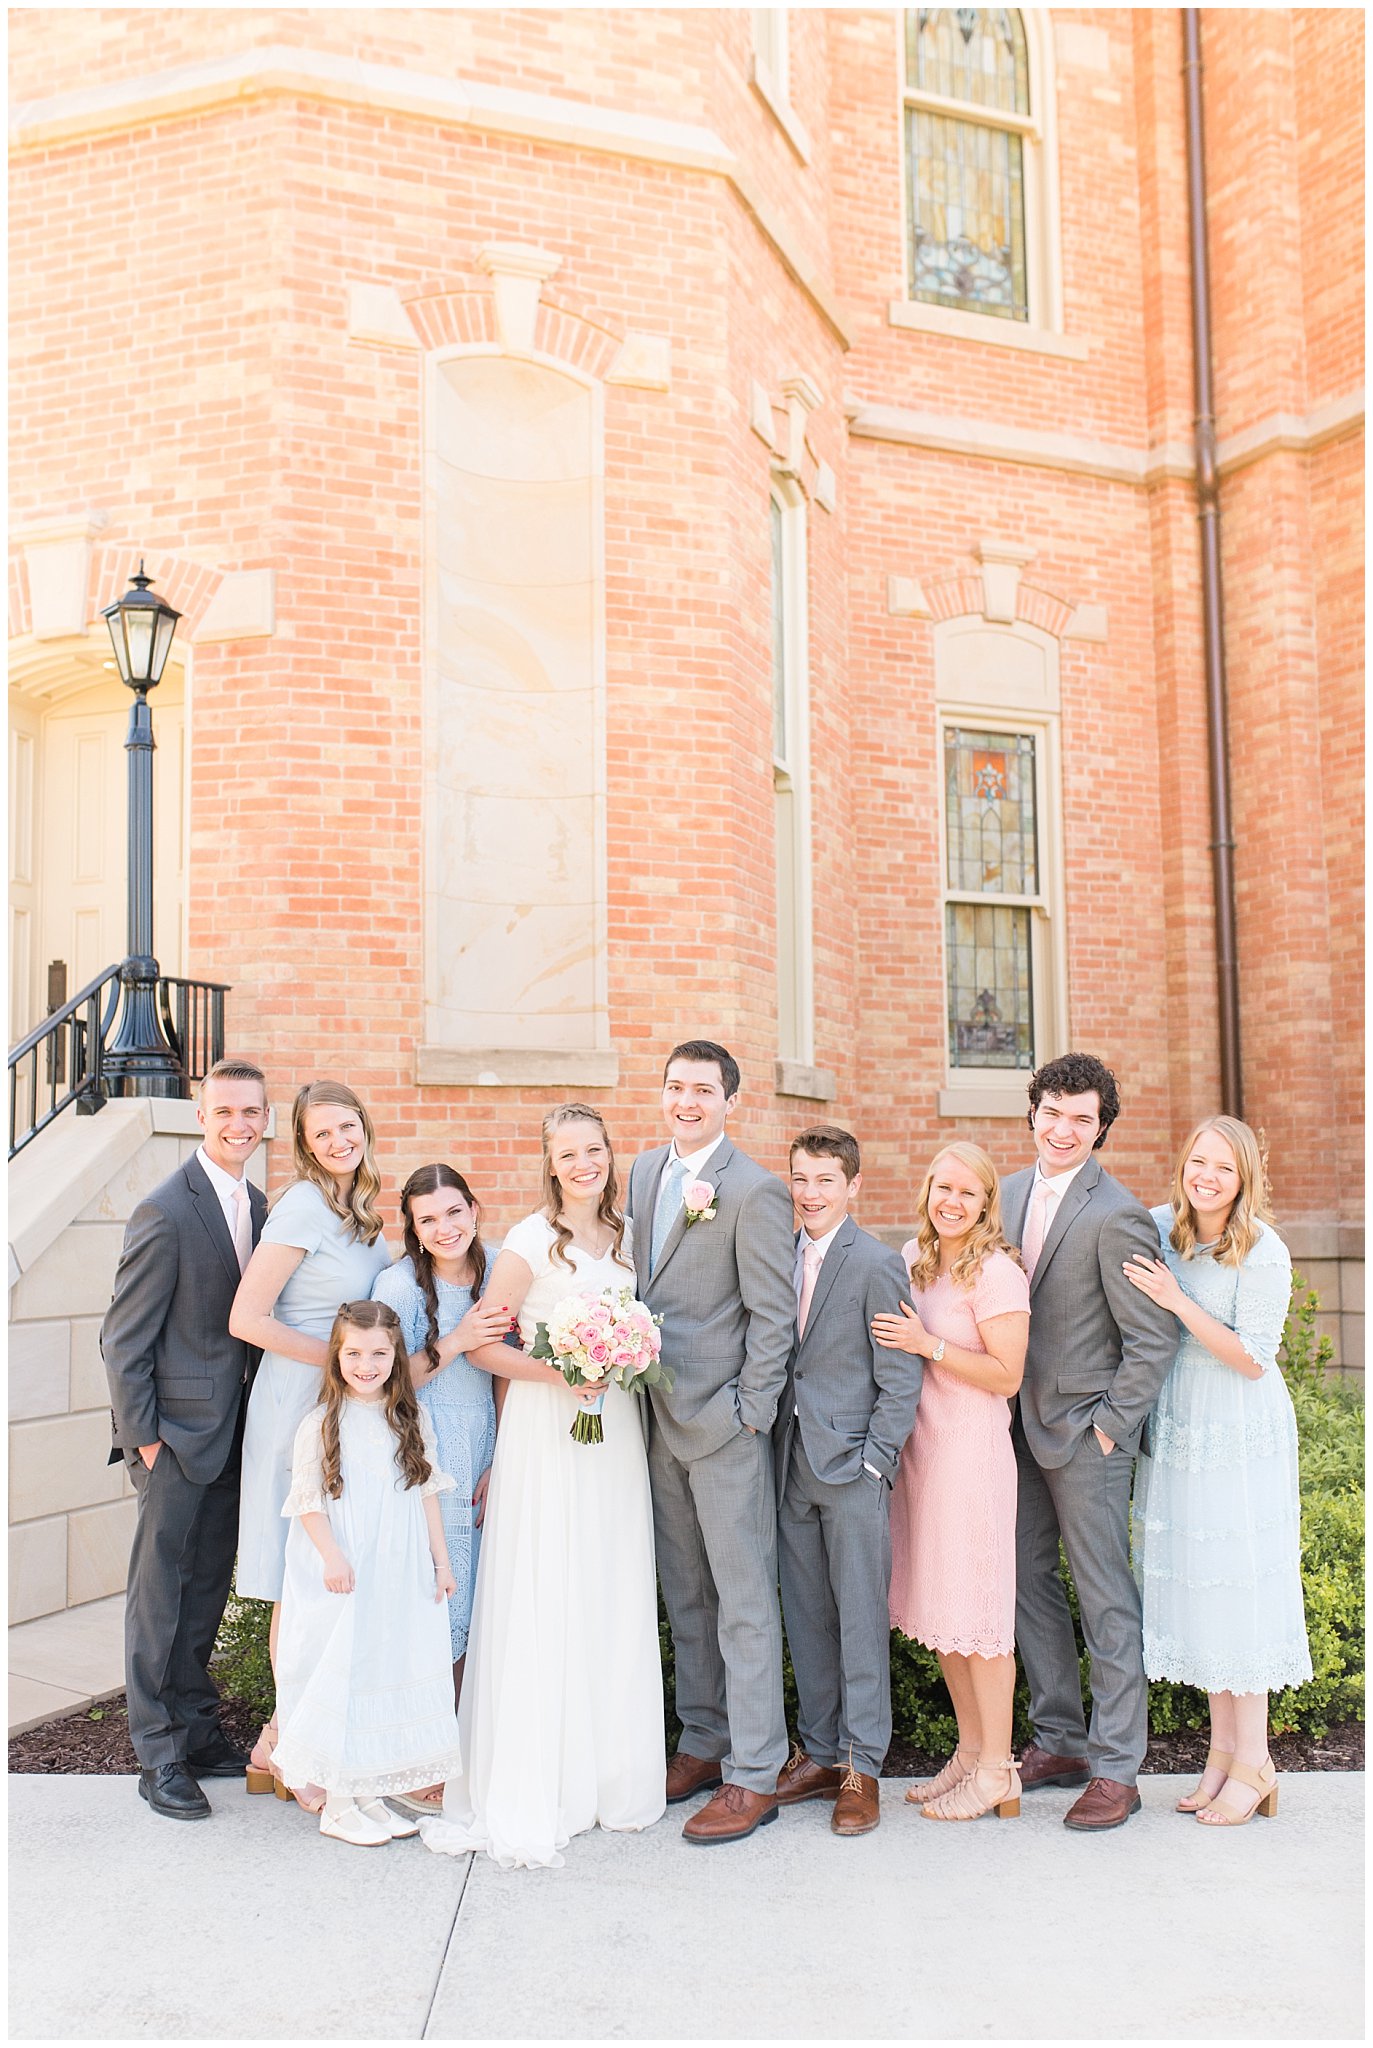 Bridal party at Provo City Center temple with grey, blush, and light blue wedding colors | Spring Provo City Center Temple Wedding | Utah Wedding Photographers | Jessie and Dallin Photography